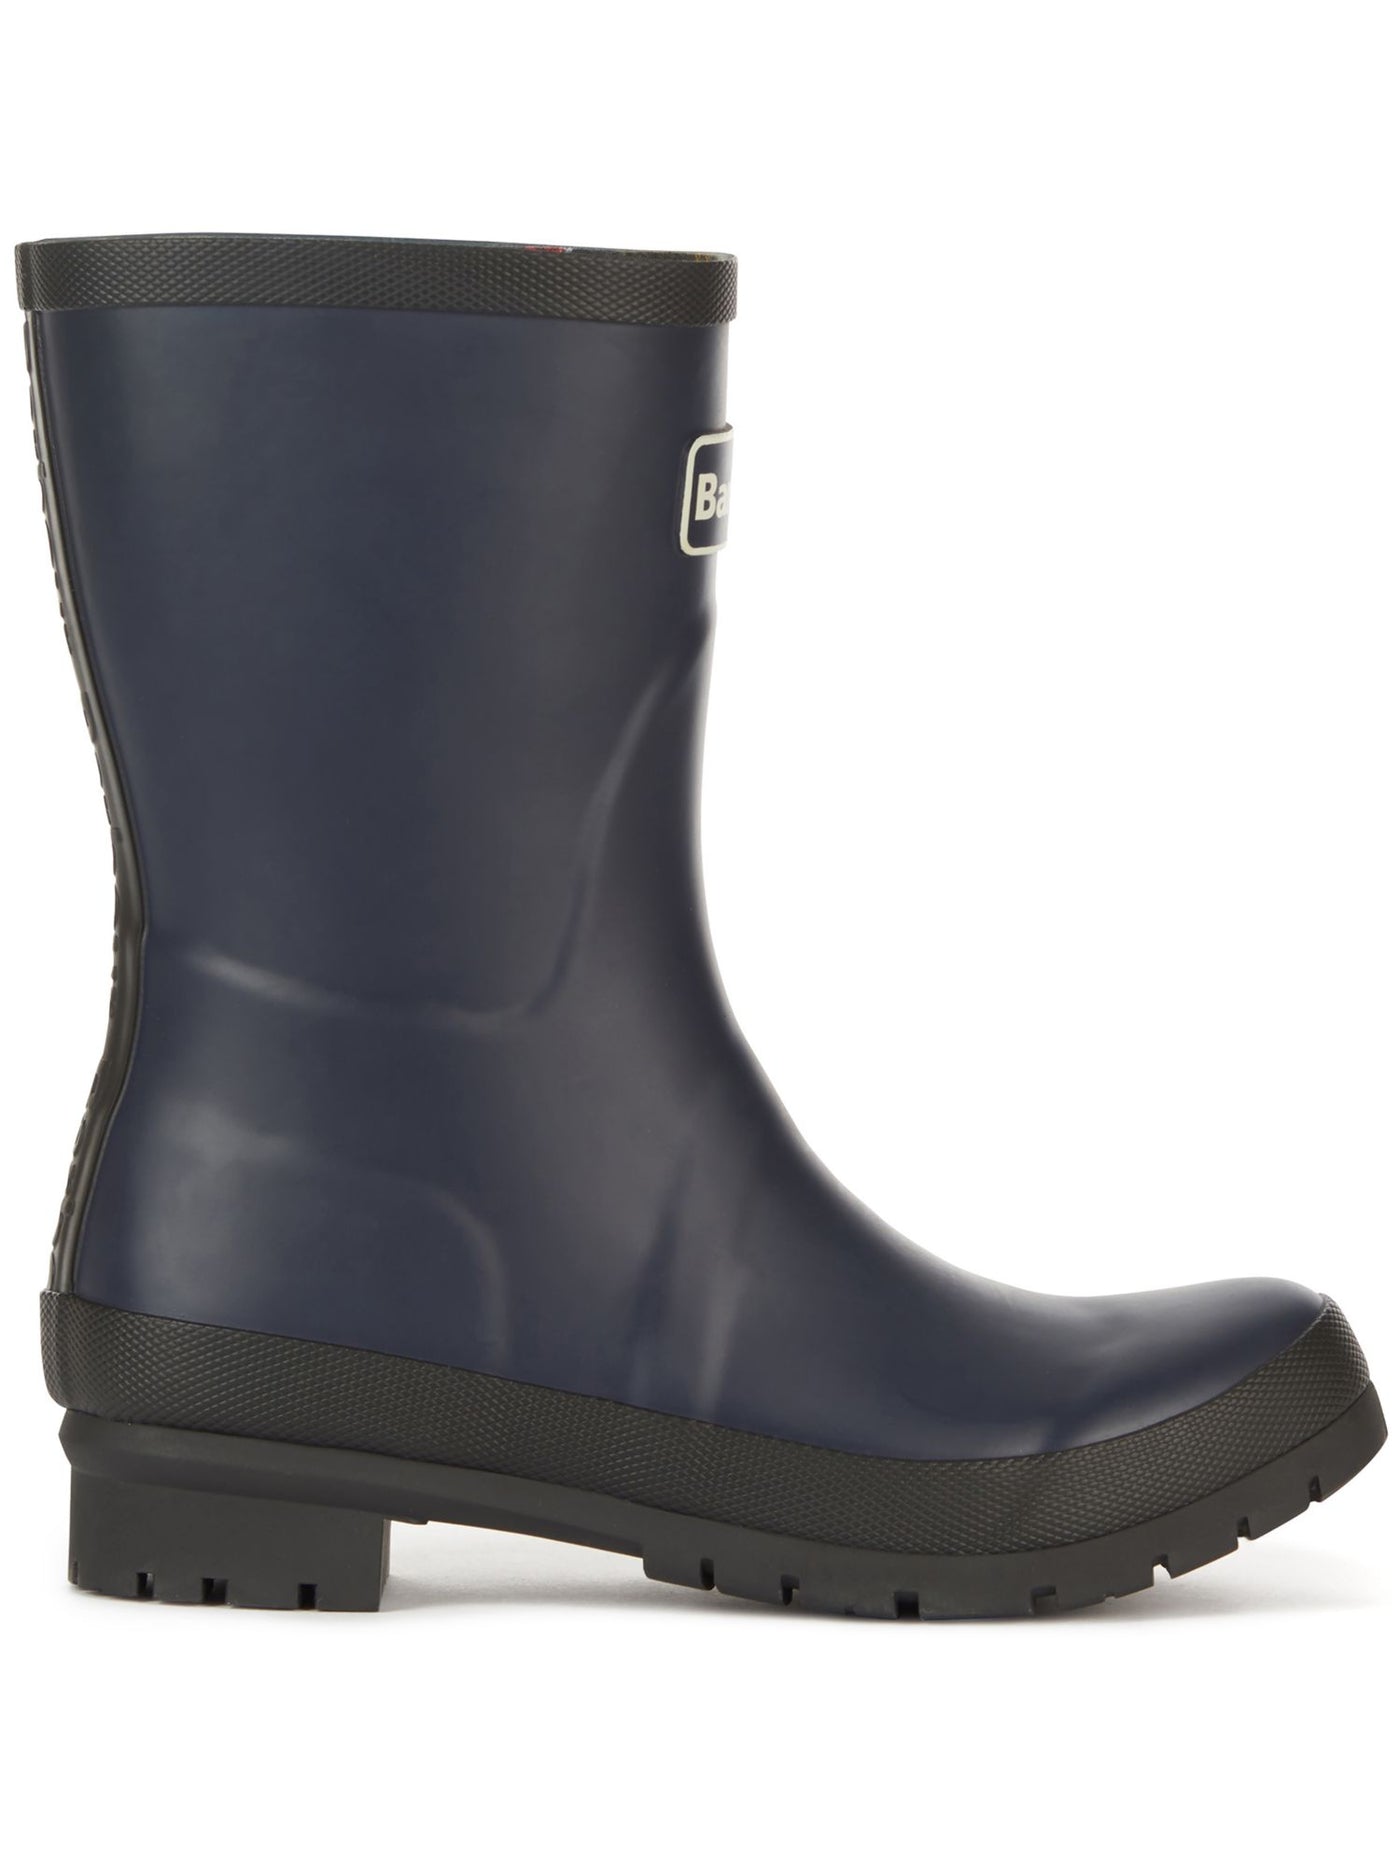 BARBOUR Womens Navy Water Resistant Padded Banbury Round Toe Slip On Rain Boots 8